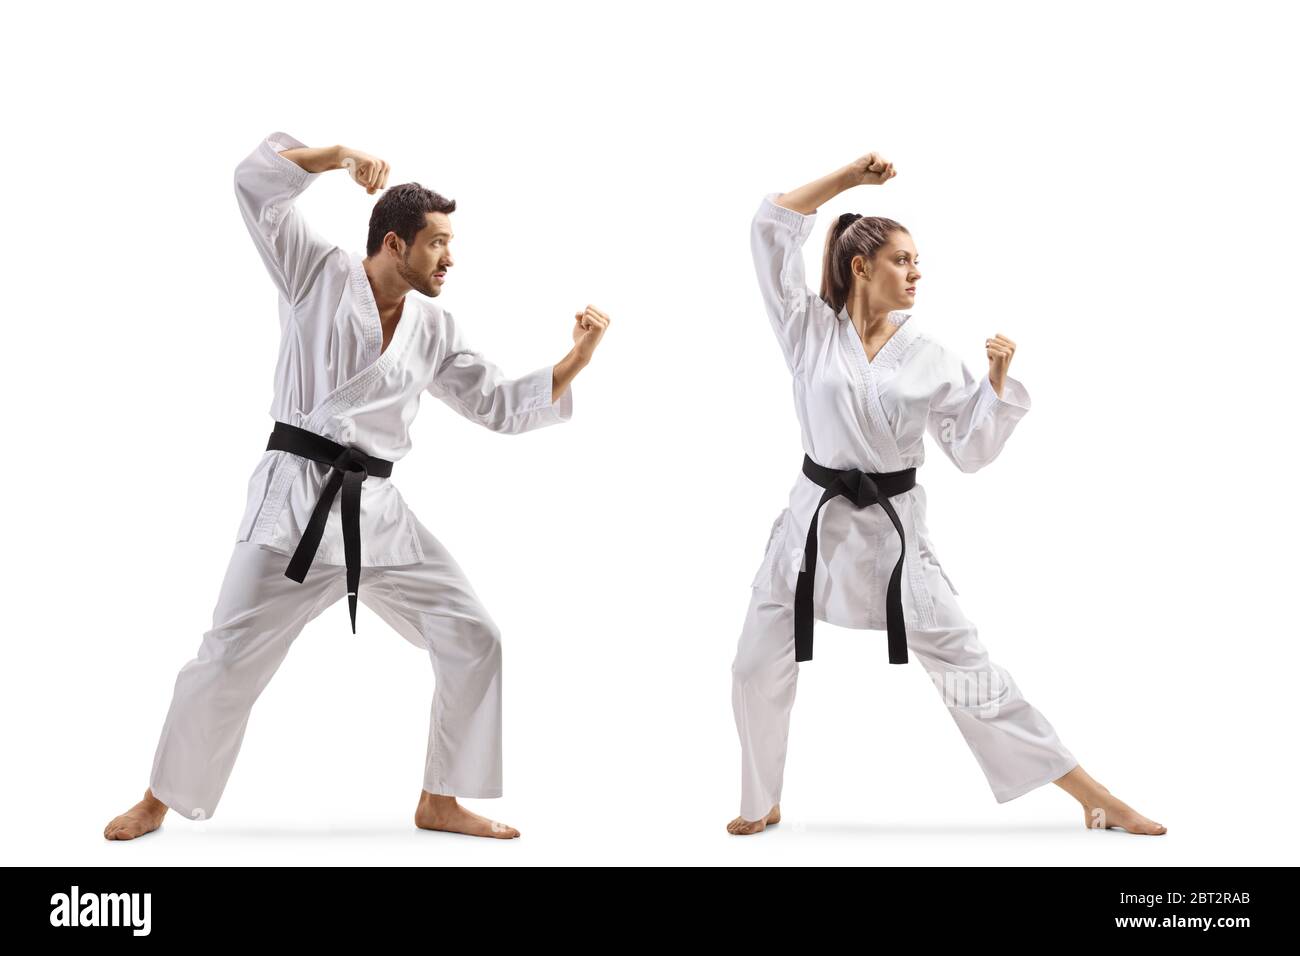 Full length shot of a young man and woman with black belts practicing karate isolated on white background Stock Photo